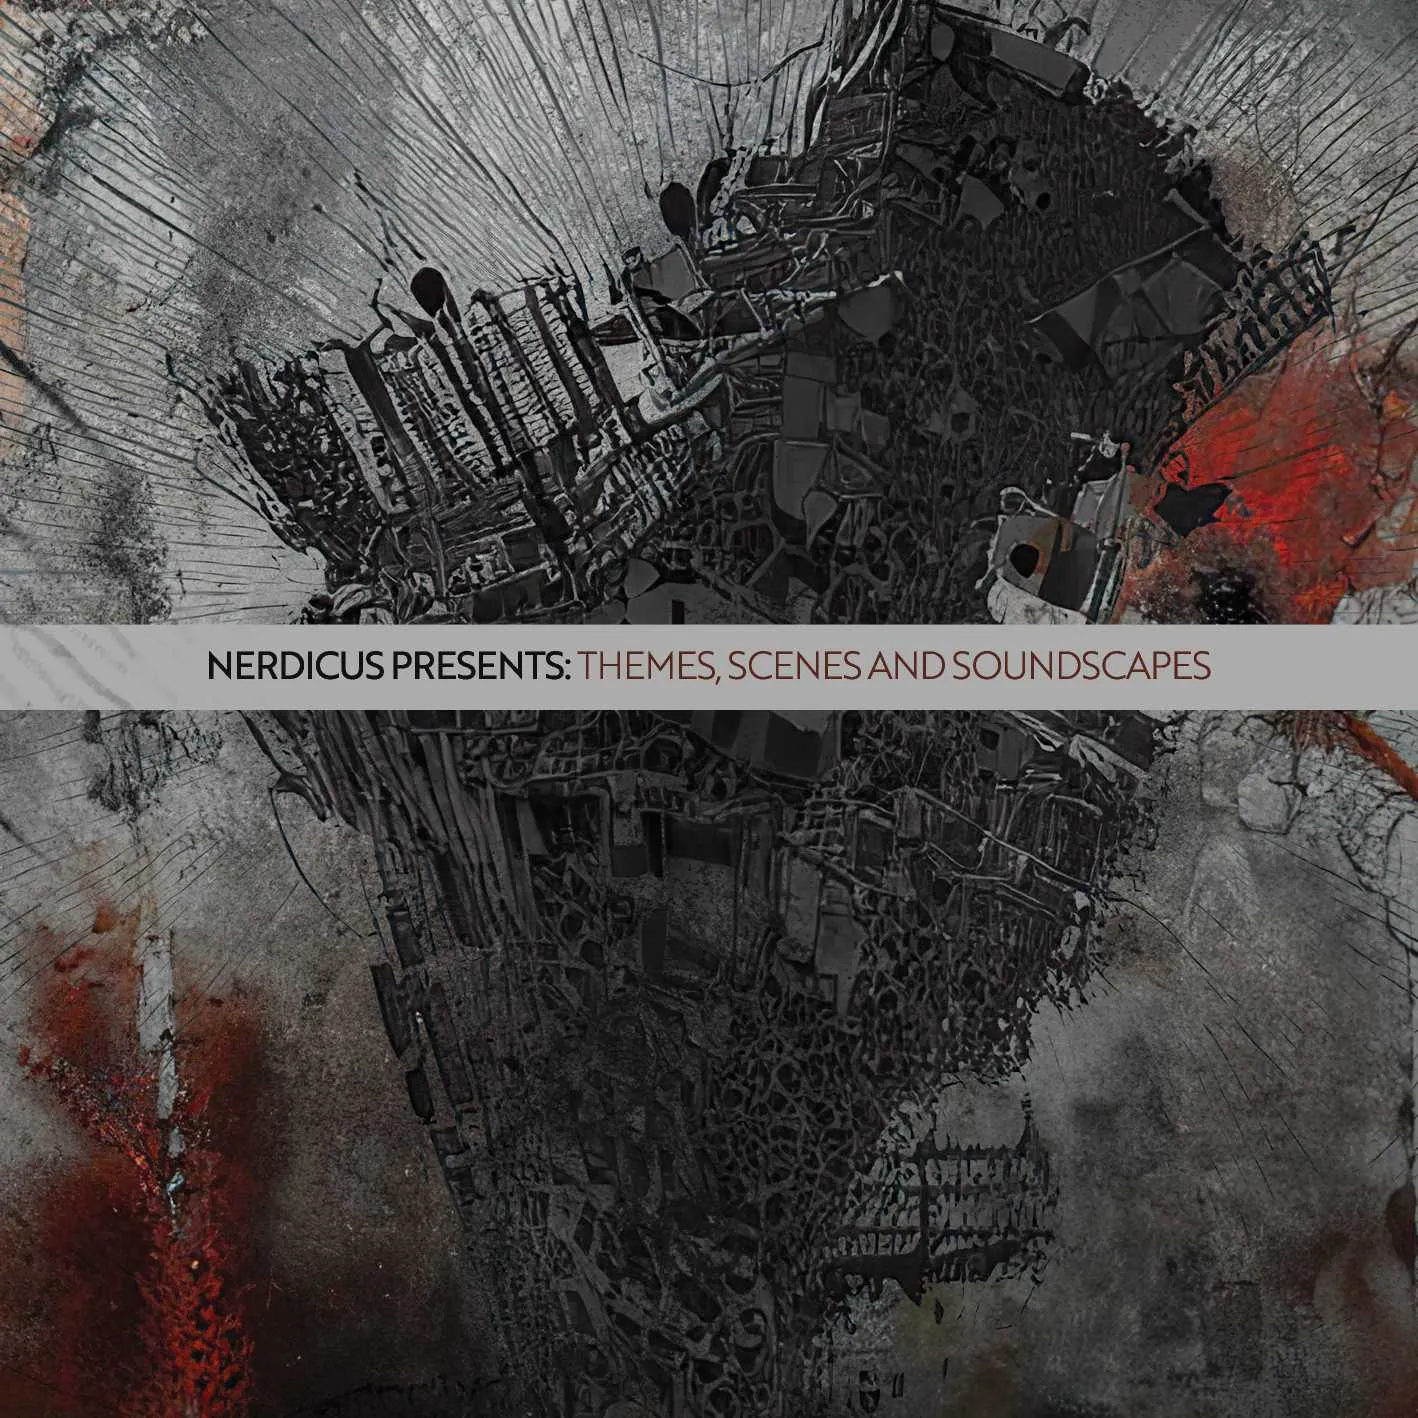 Album cover for “Nerdicus Presents: Themes, Scenes and Soundscapes” by Nerdicus